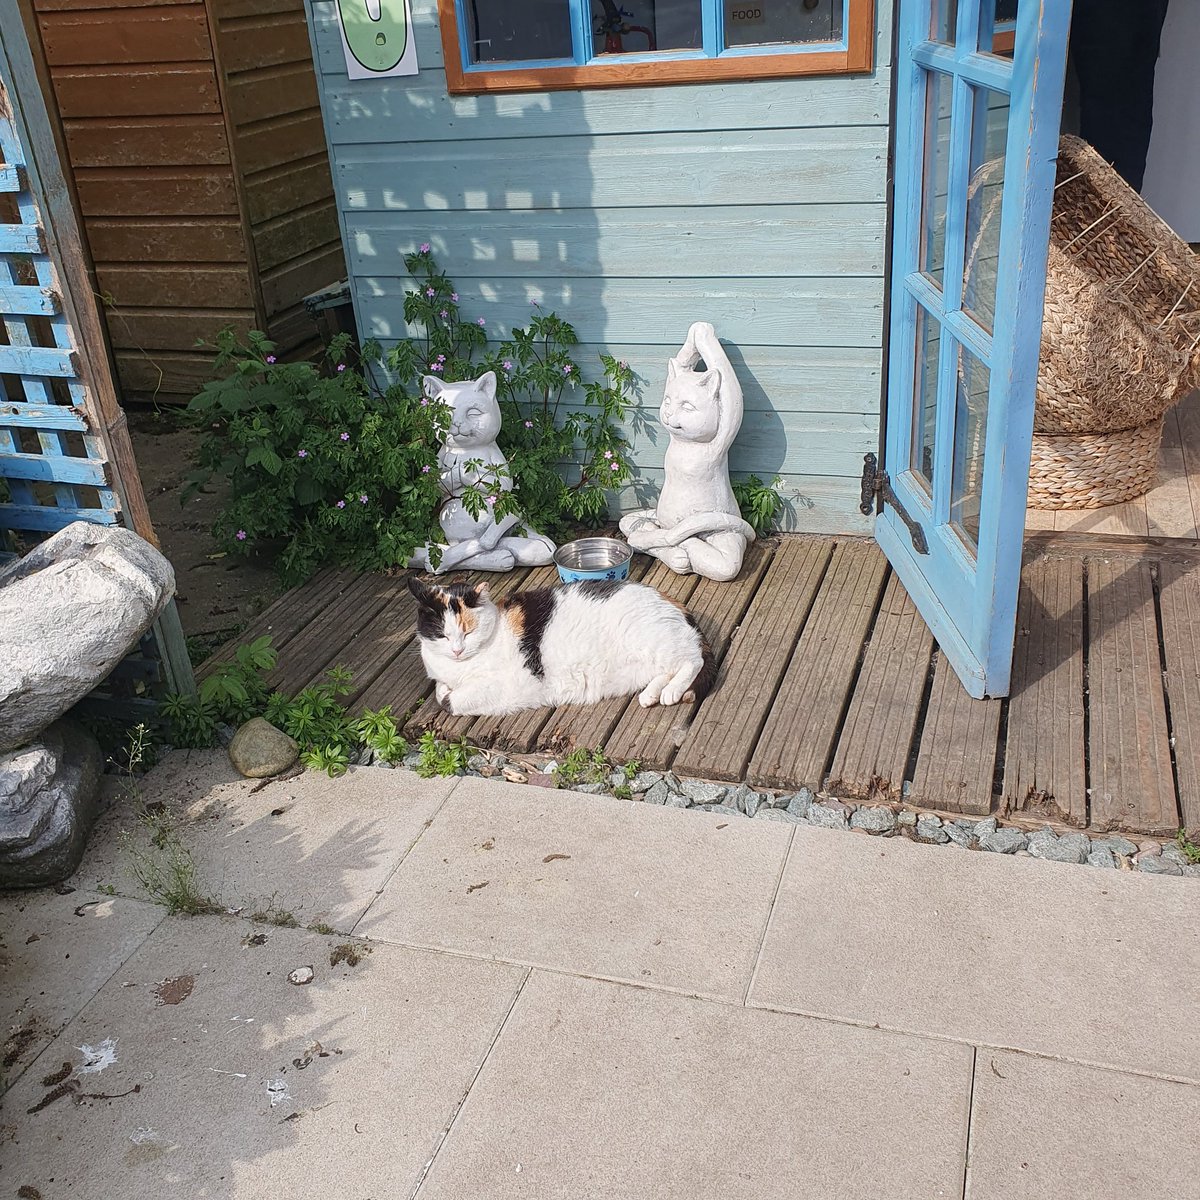 #MondayVibes ~ what a great day it was for afternoon tea yesterday. Even the Freerangers made an appearance. Here Annwyn was enjoying the sunshine 🌞🐾😻 #inthecompanyofcats #purrfectfelines #CatsOnTwitter #catrescue #seniorcats